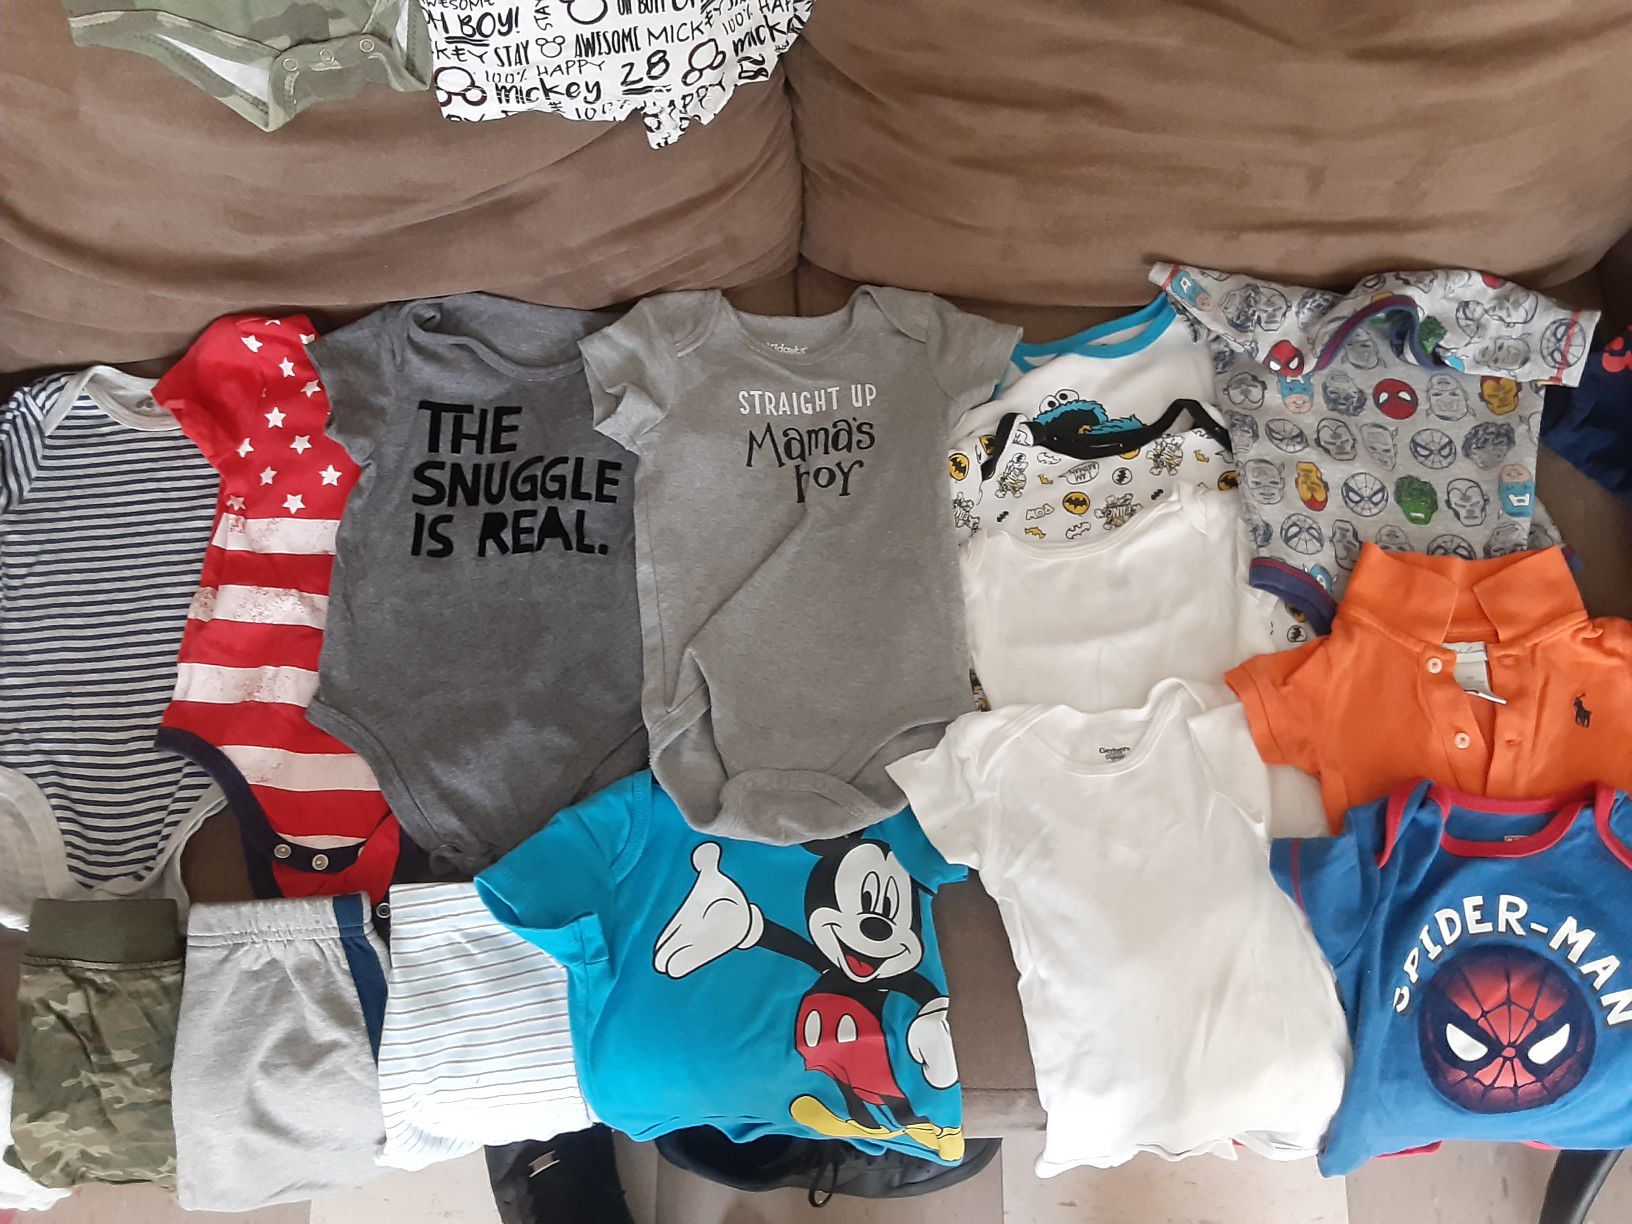 New and Used Baby clothes size from 0-6 months and 6-9 months